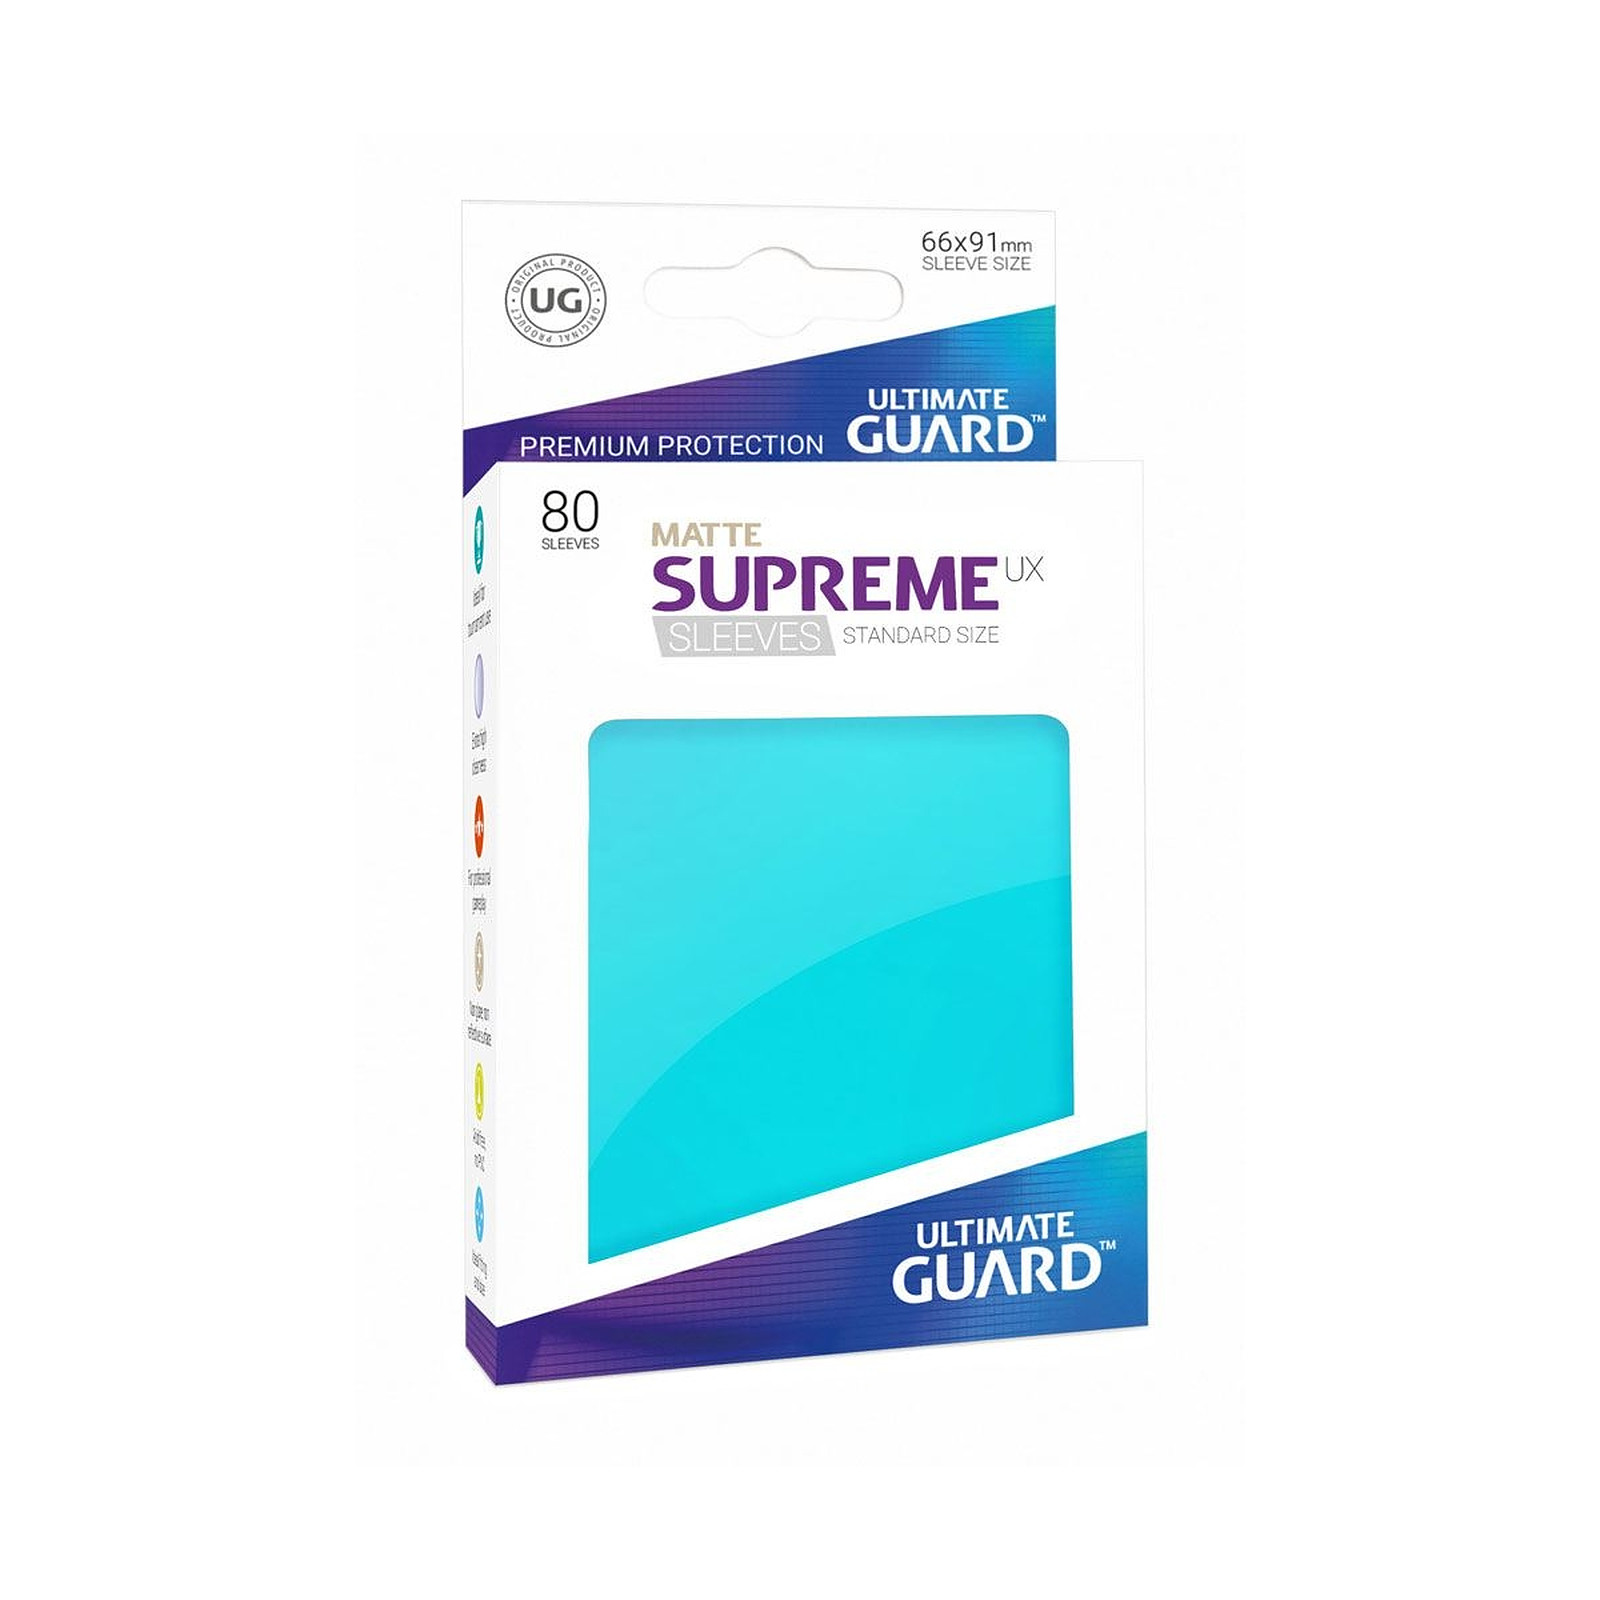 Ultimate Guard - 80 pochettes Supreme UX Sleeves taille standard Aigue-marine Mat - Accessoire jeux Ultimate Guard